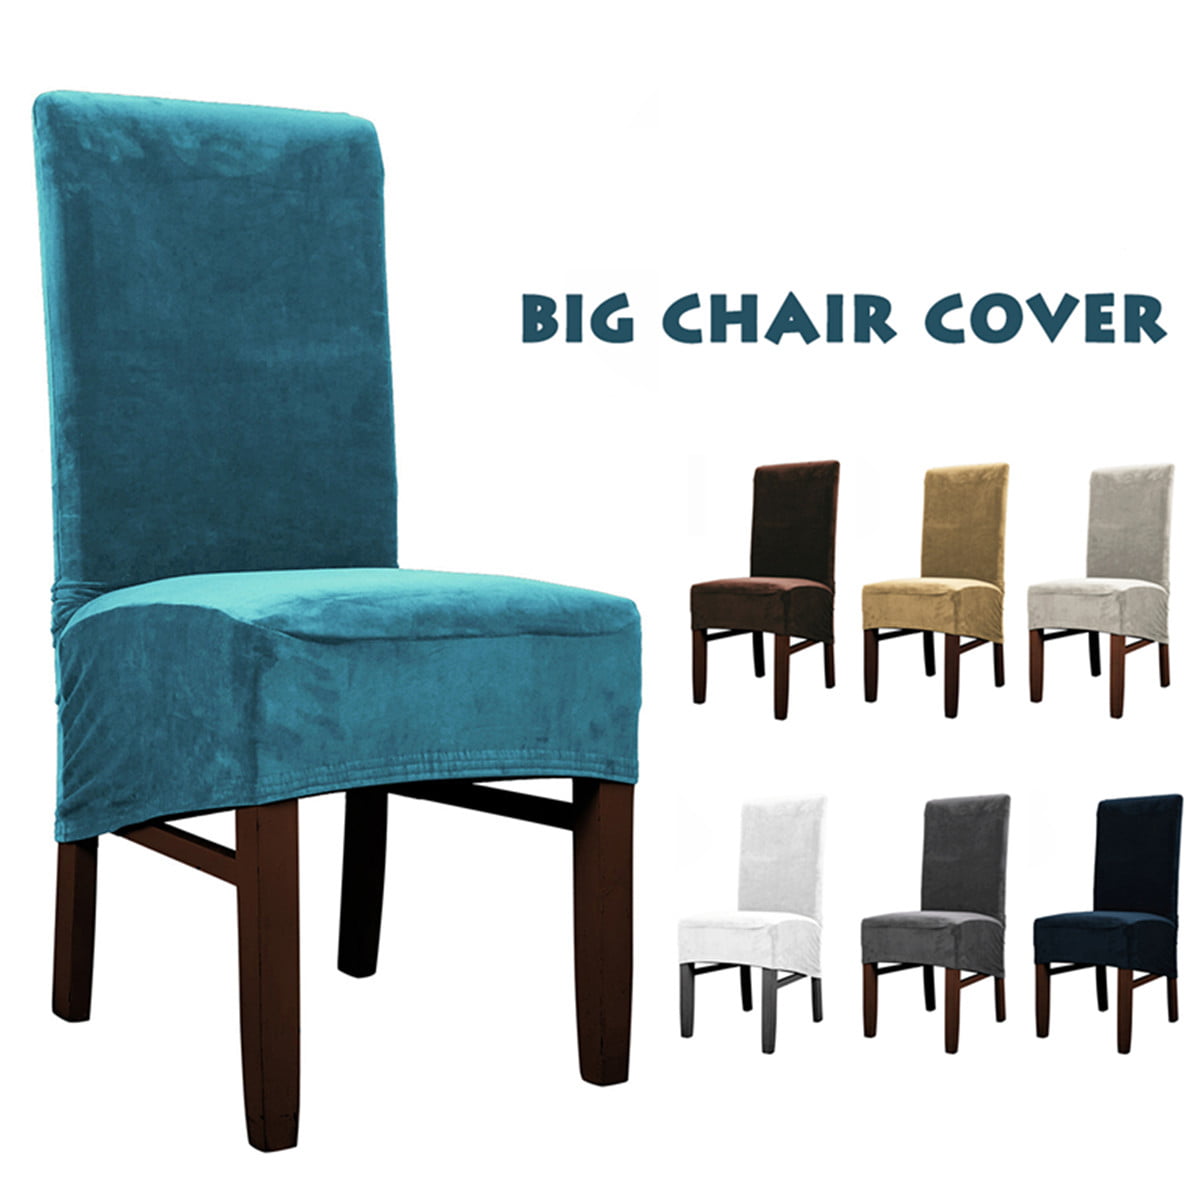 1x Removable Elastic Chair Slipcovers Solid Color Short Dinning Room Seat Covers 